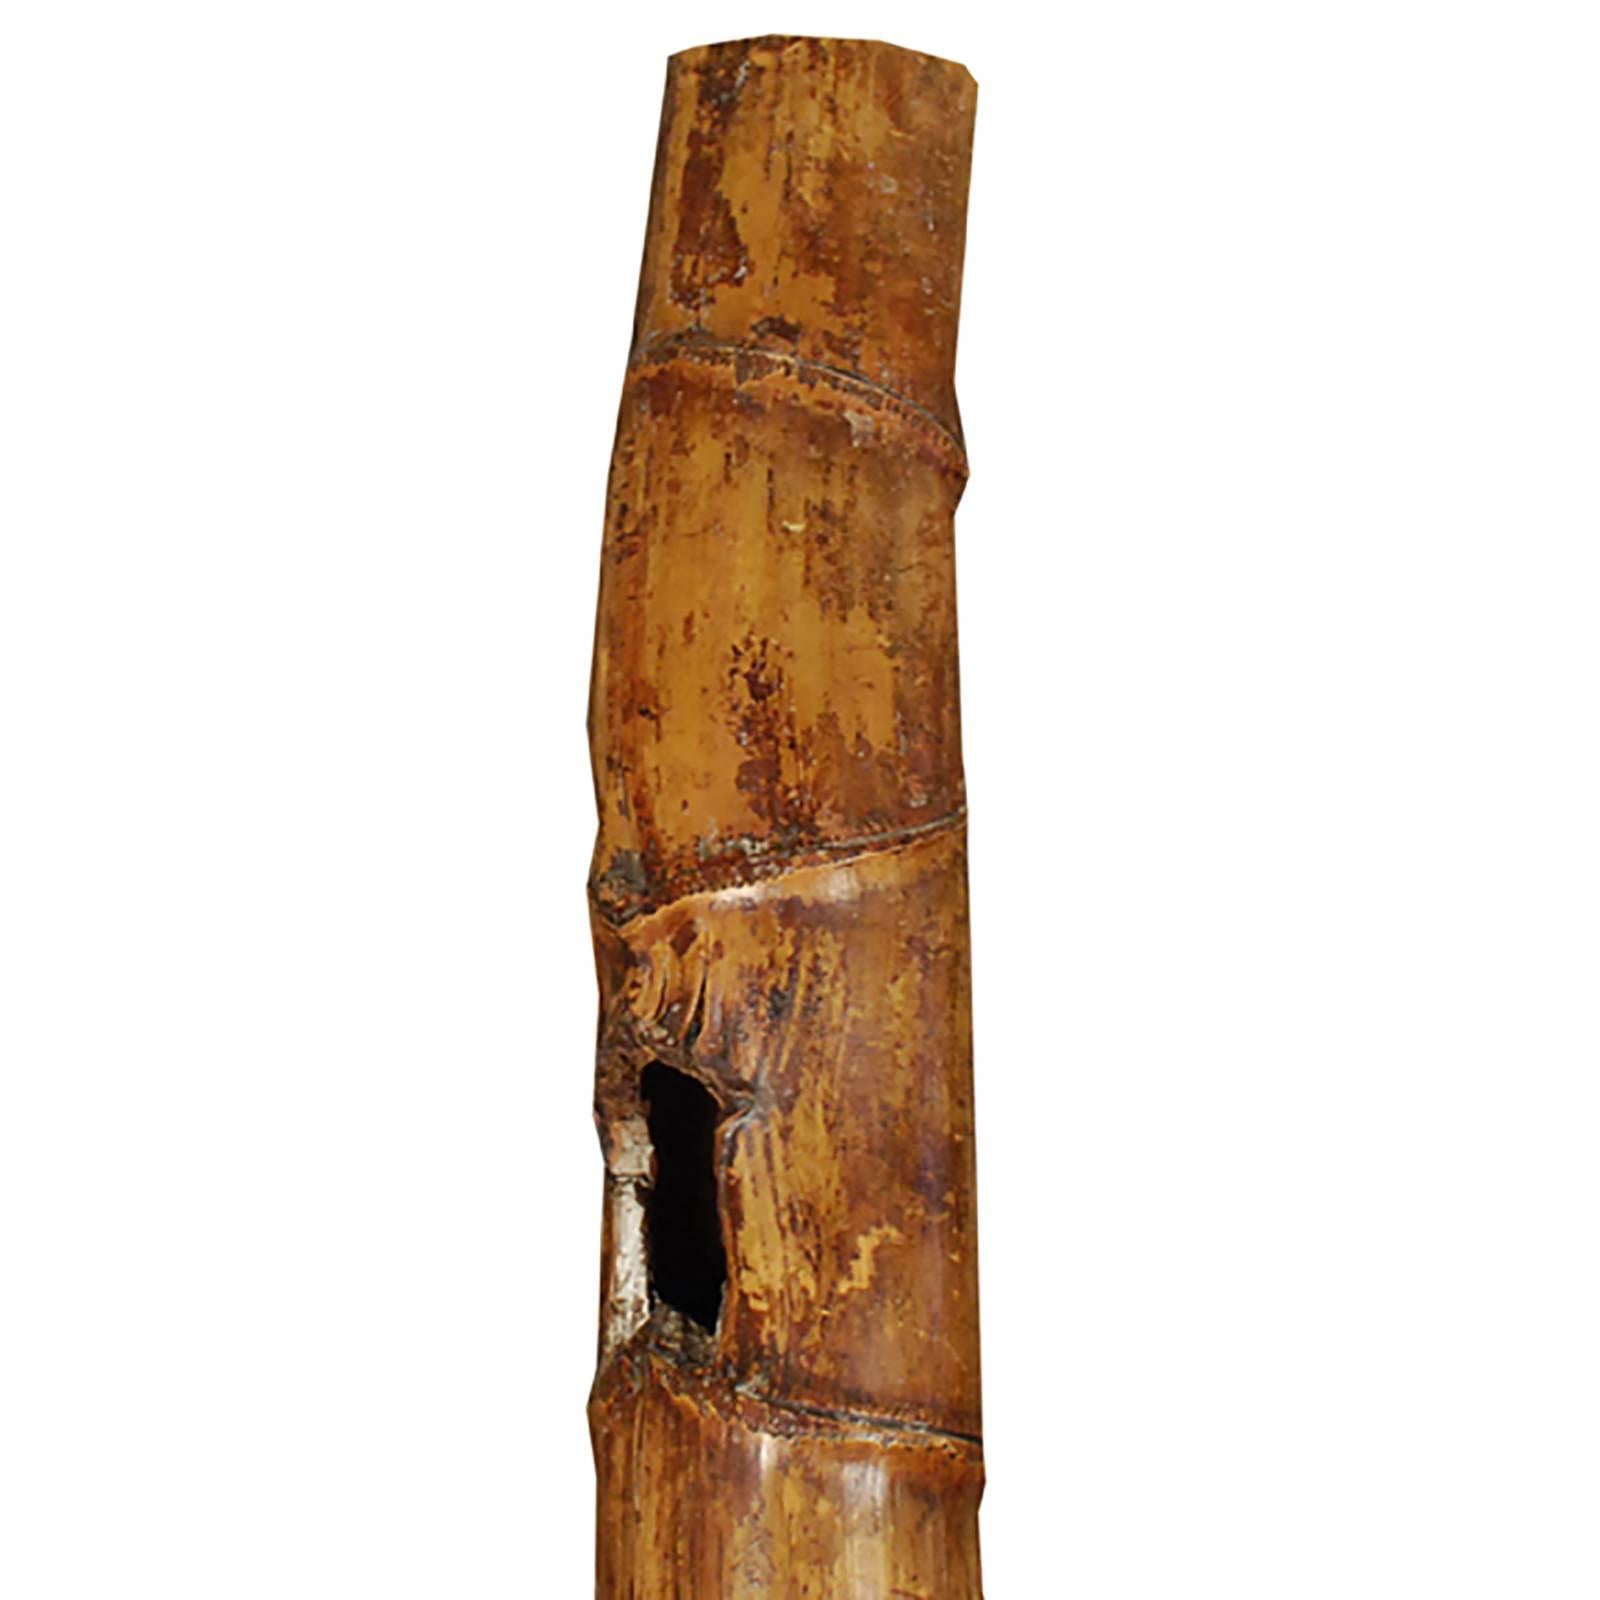 This sculptural form is actually a 19th century pipe made from a special type of bamboo that bulges between growth lines like a “Buddha's belly”. The shaft looks too long to hold comfortably, but the length helped filter the smoke. This special type